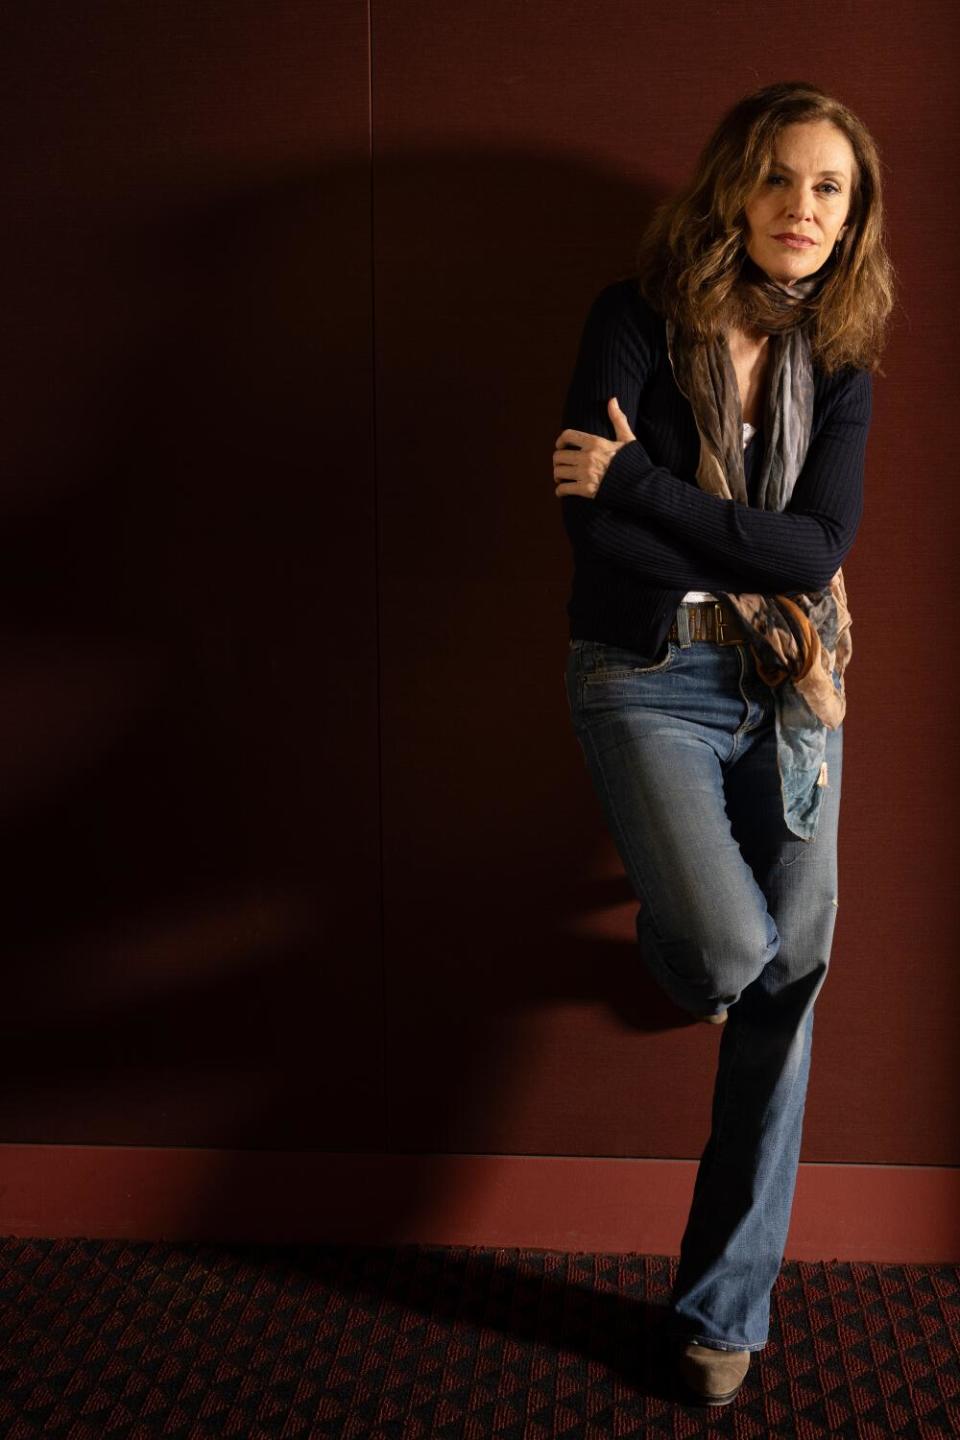 A woman standing against a wall, one leg bent to put her foot up against the wall